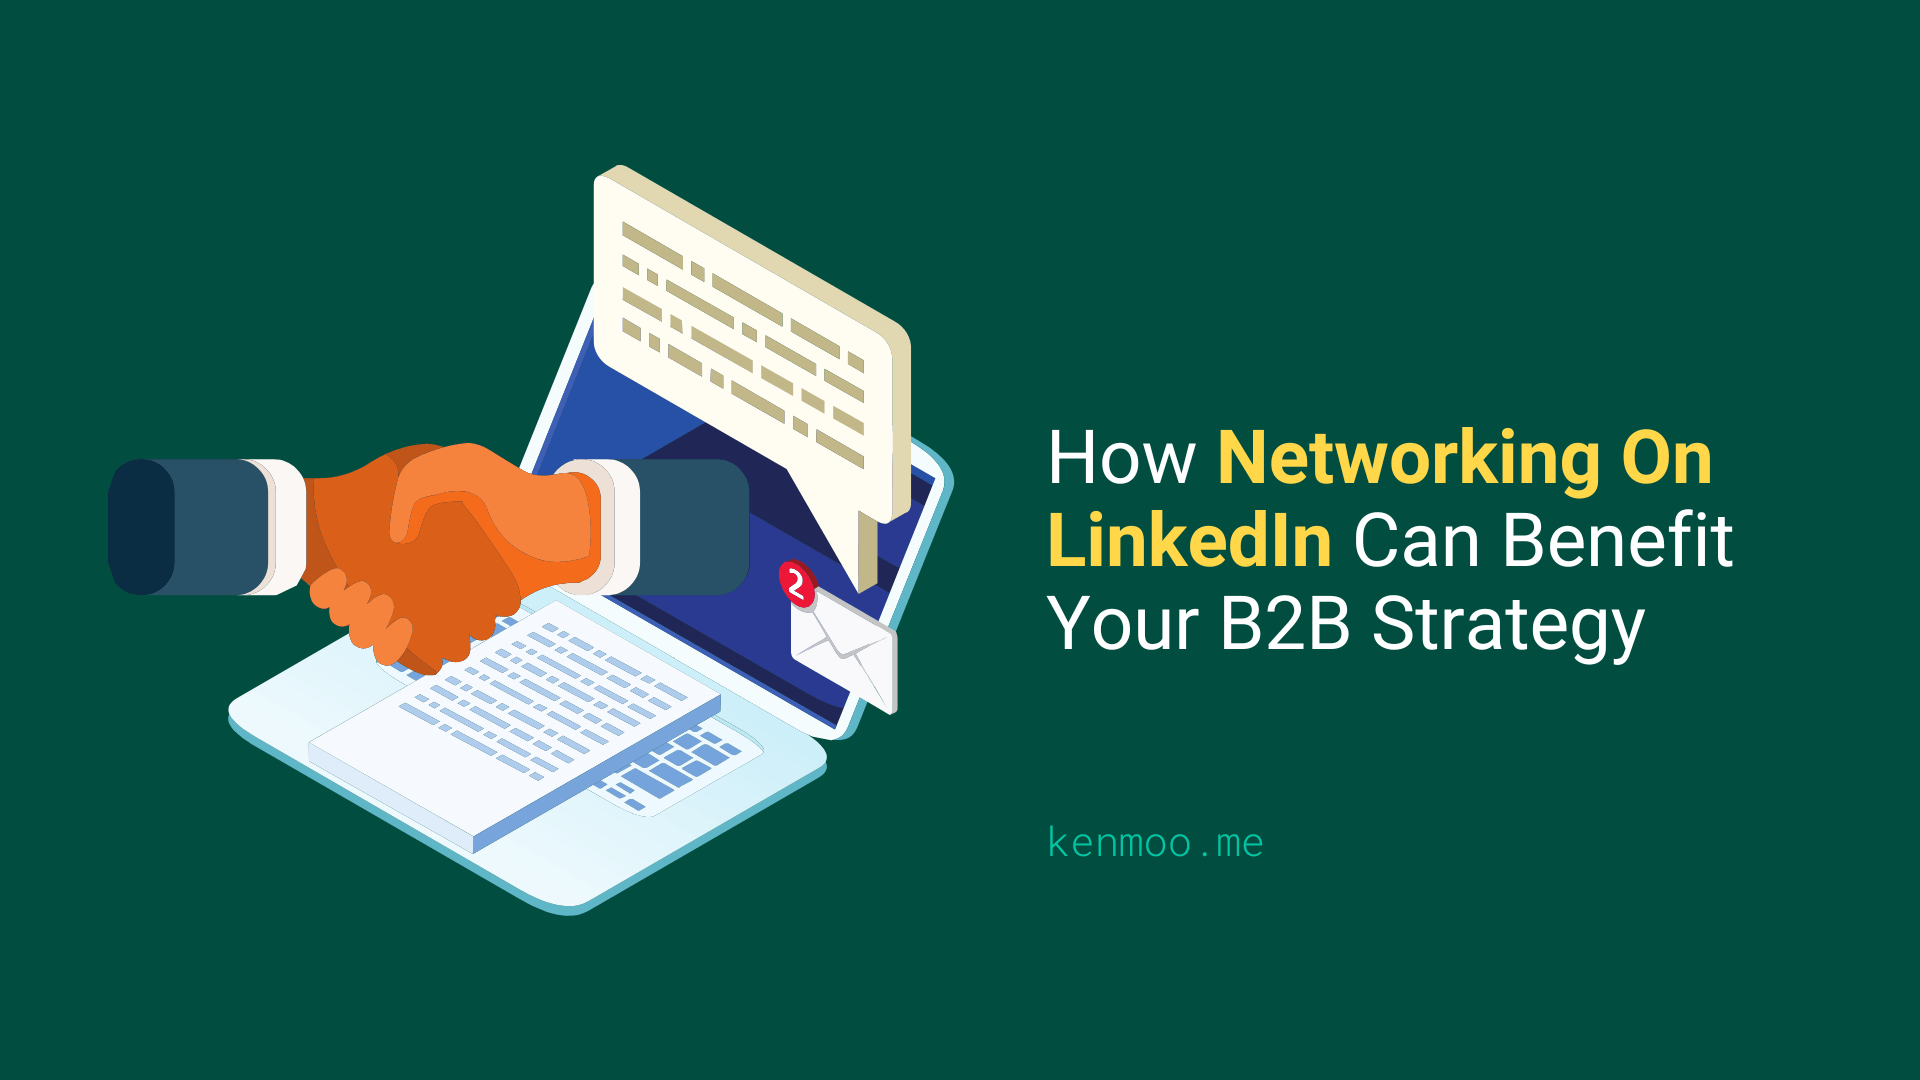 How Networking On LinkedIn Can Benefit Your B2B Strategy